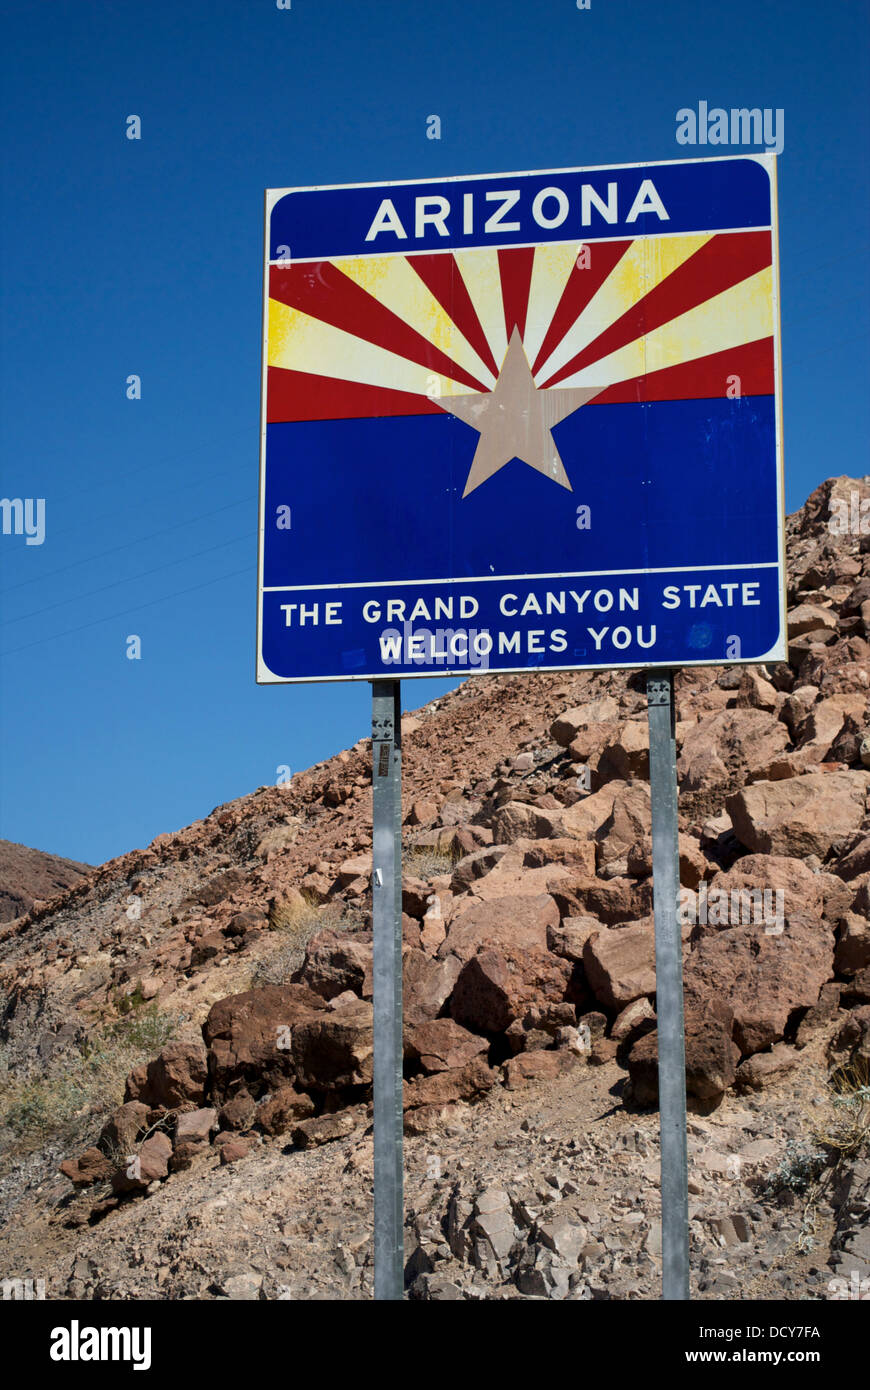 The Arizona State sign at the side of the road near Hoover Dam, rocks and blue sky behind it. Stock Photo